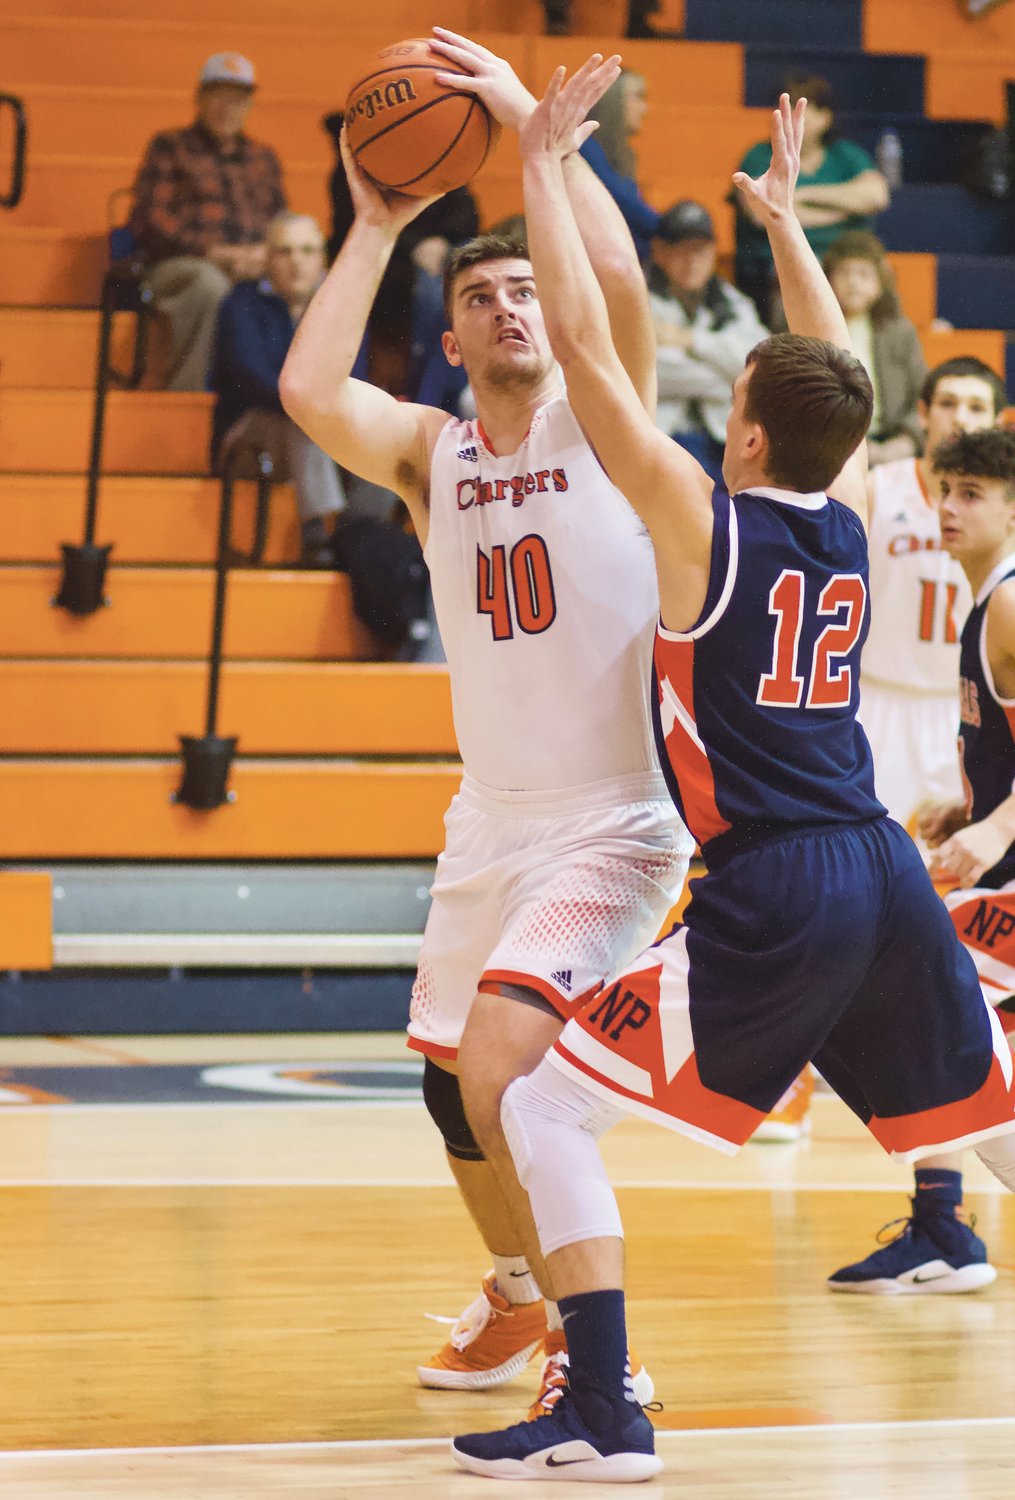 North Montgomery's Jack Thompson scored nine points in the Chargers game against North Putnam last season.